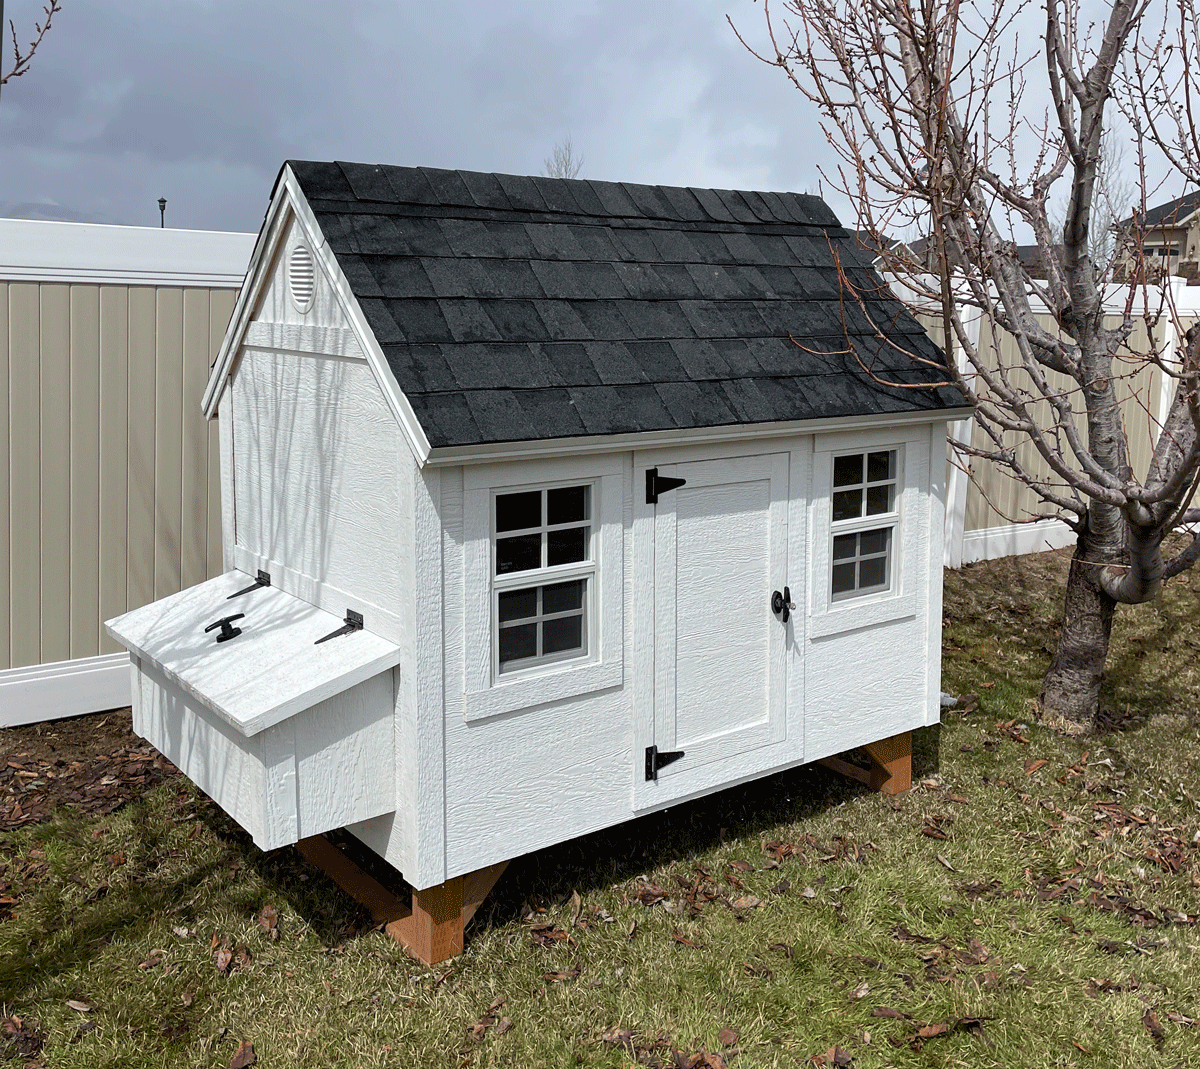 A large Hen Hut chicken coop in white and black